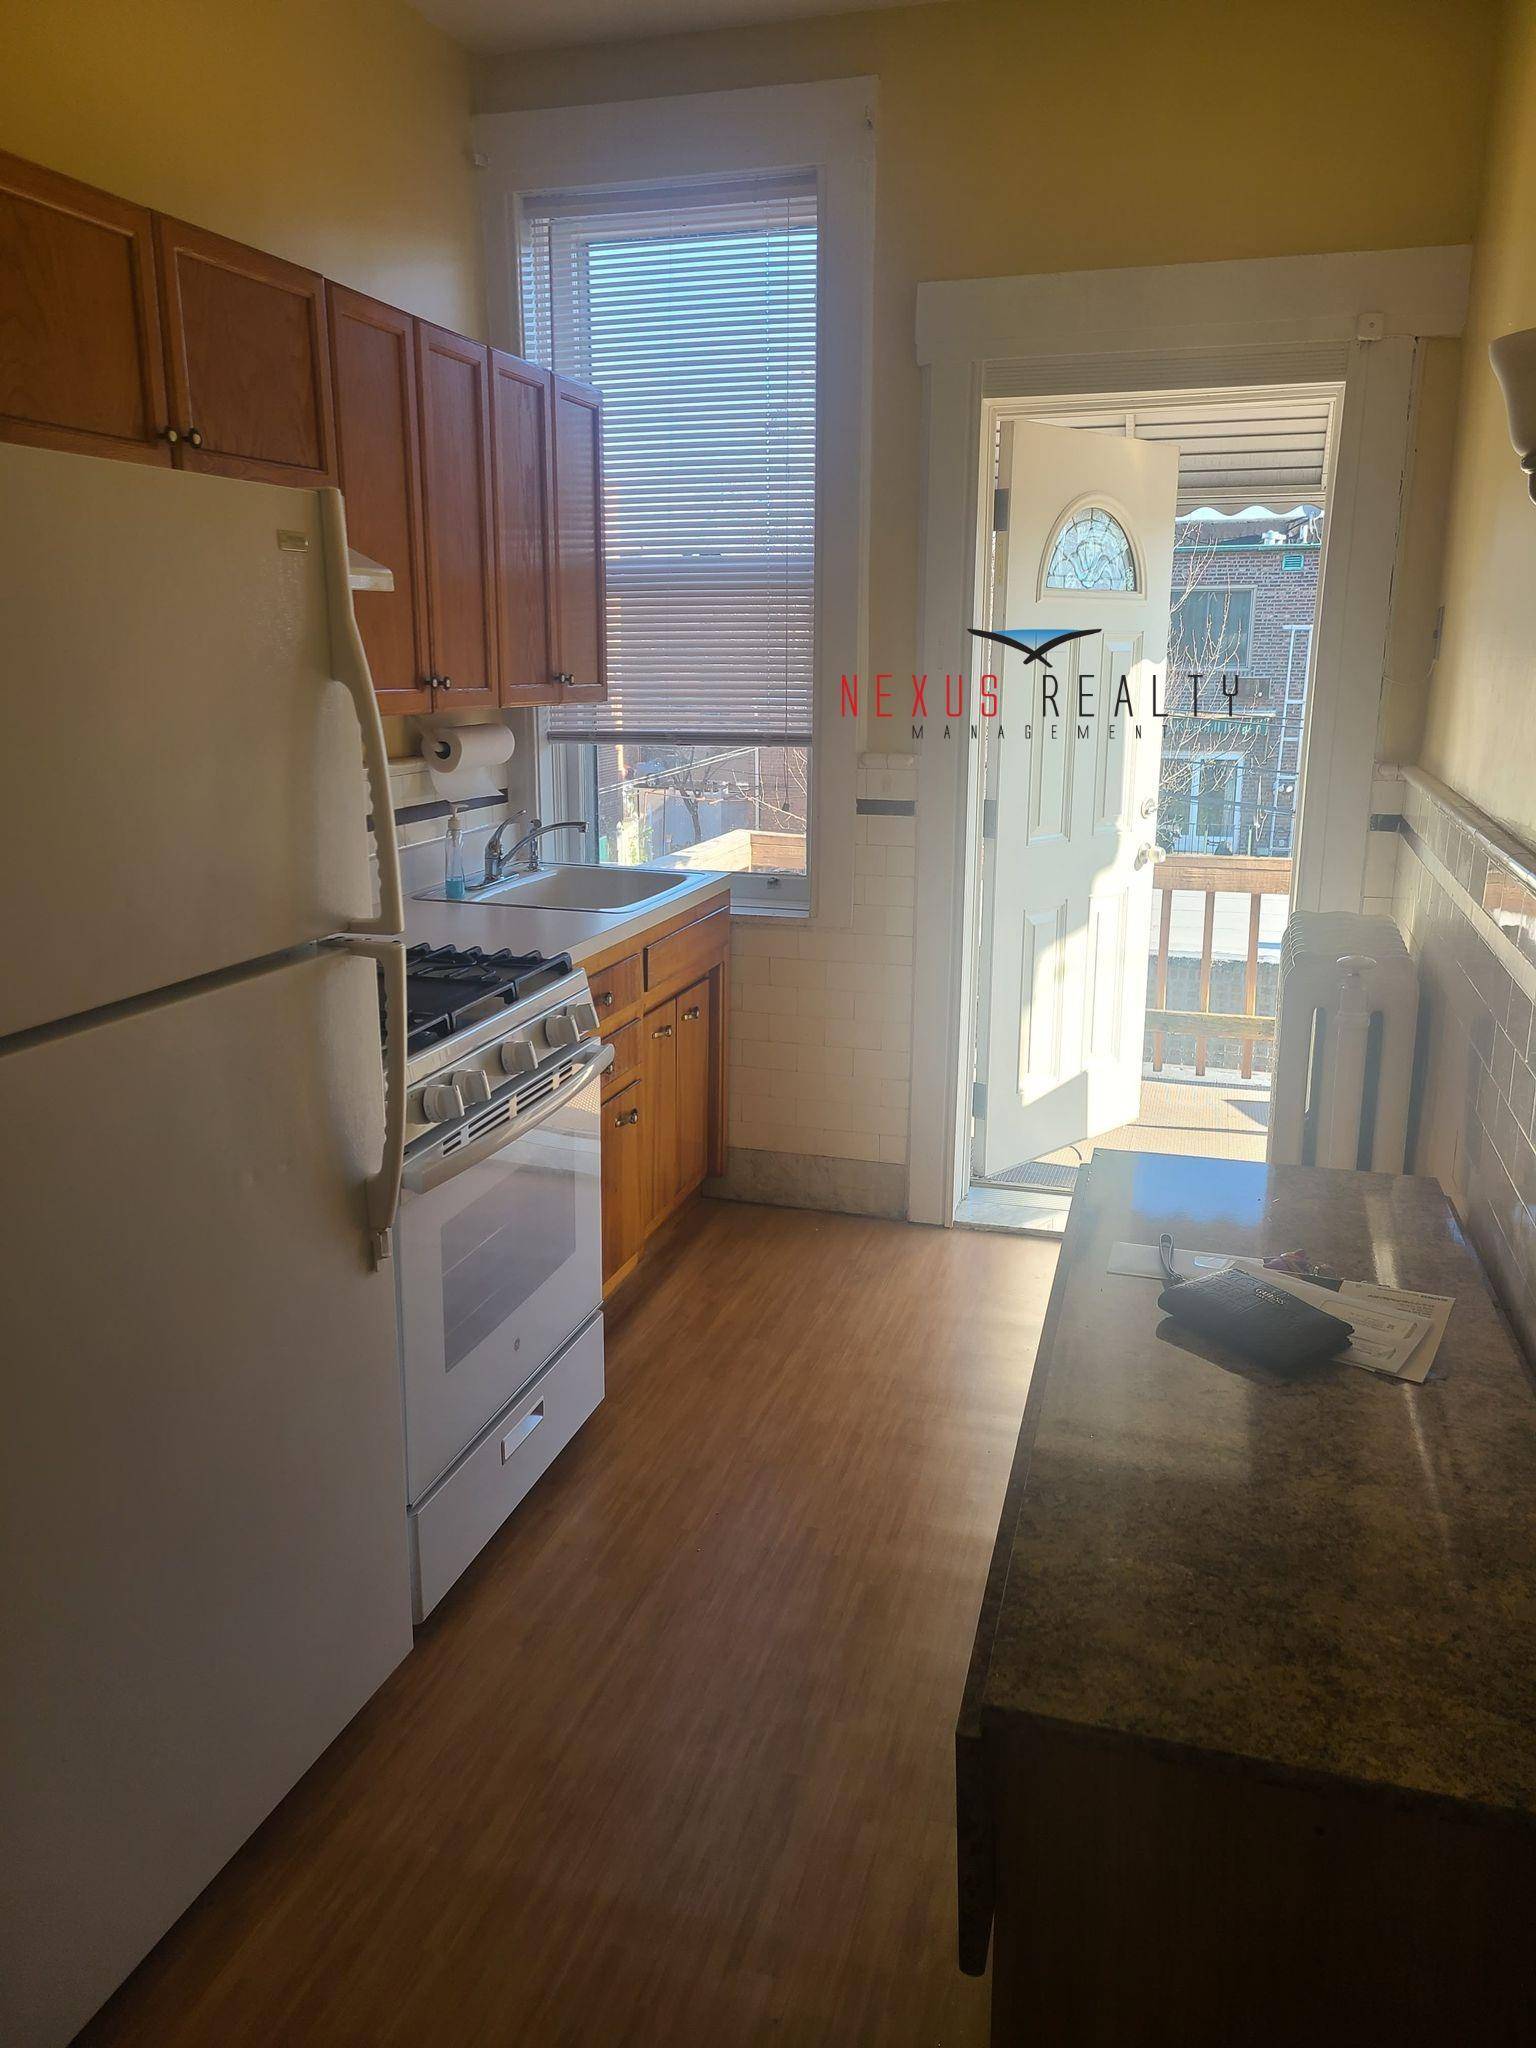 Spacious 3 Bedroom apartment in Astoria ONLY 23002 King size bedrooms and 1 smaller bedroom on the 2nd floor in a private houseEat in kitchen with plenty of cabinet space ...